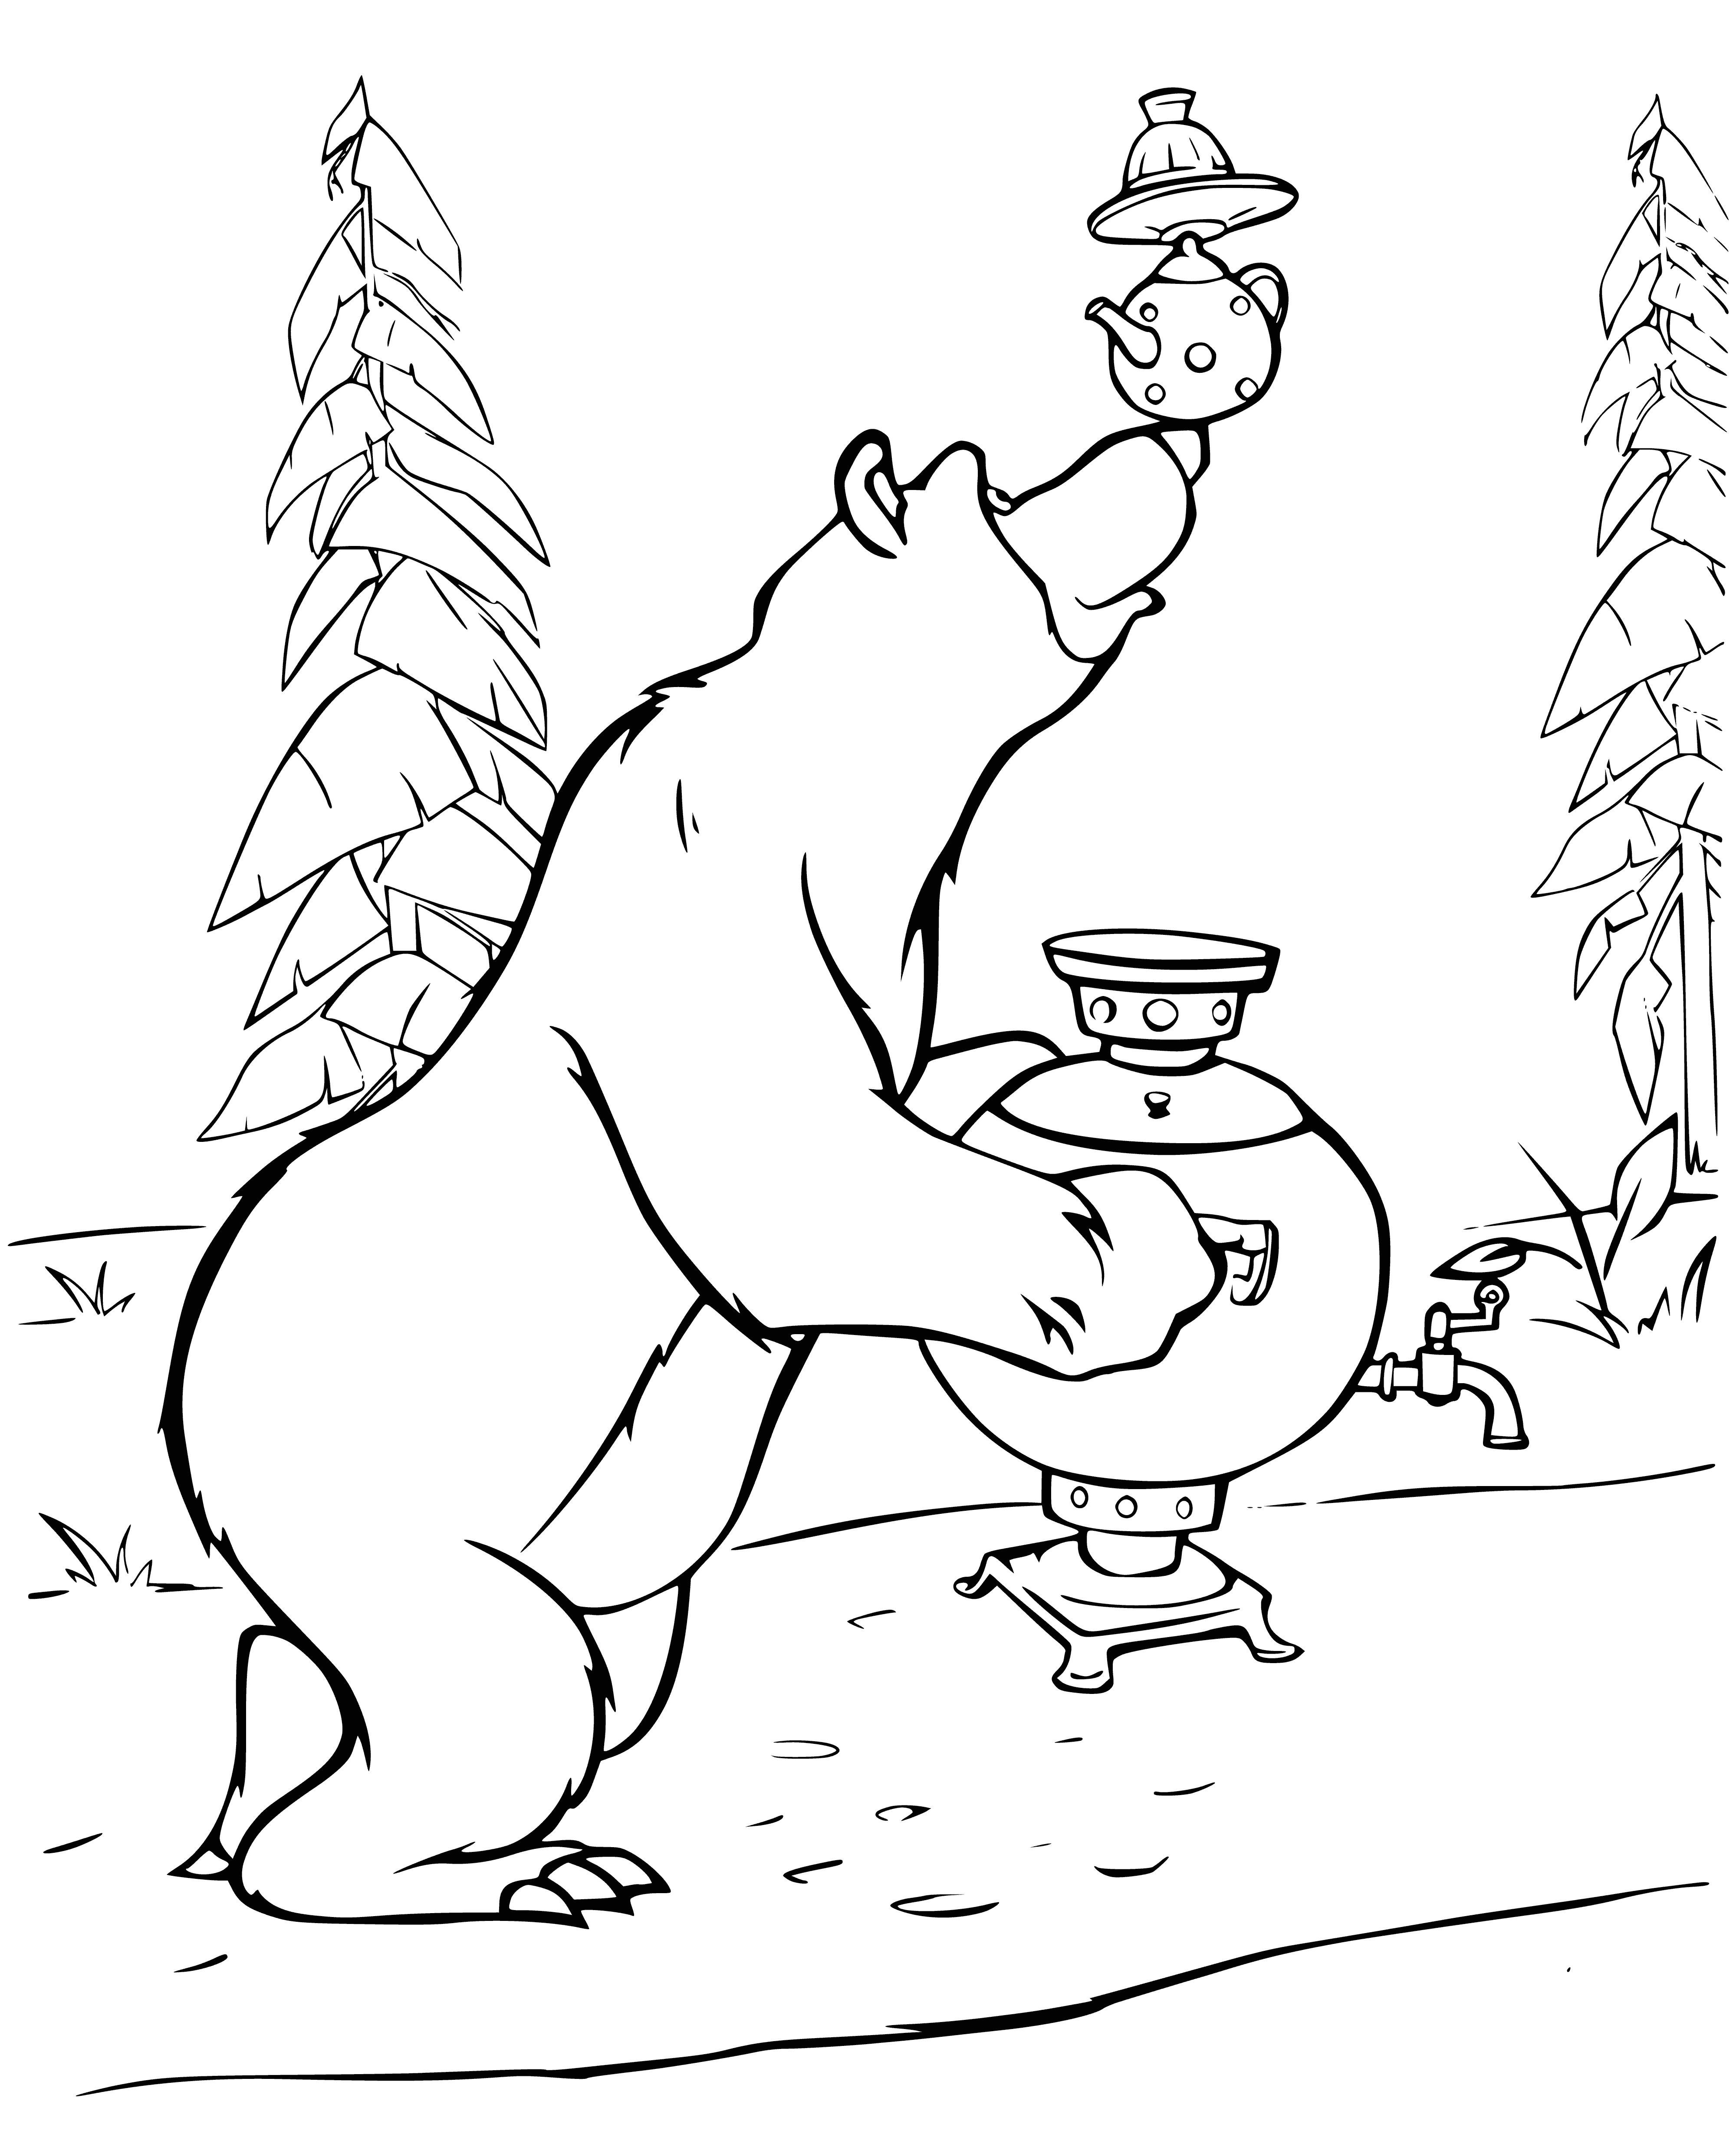 coloring page: Bear with bright scarf stirring pot with metal spoon.